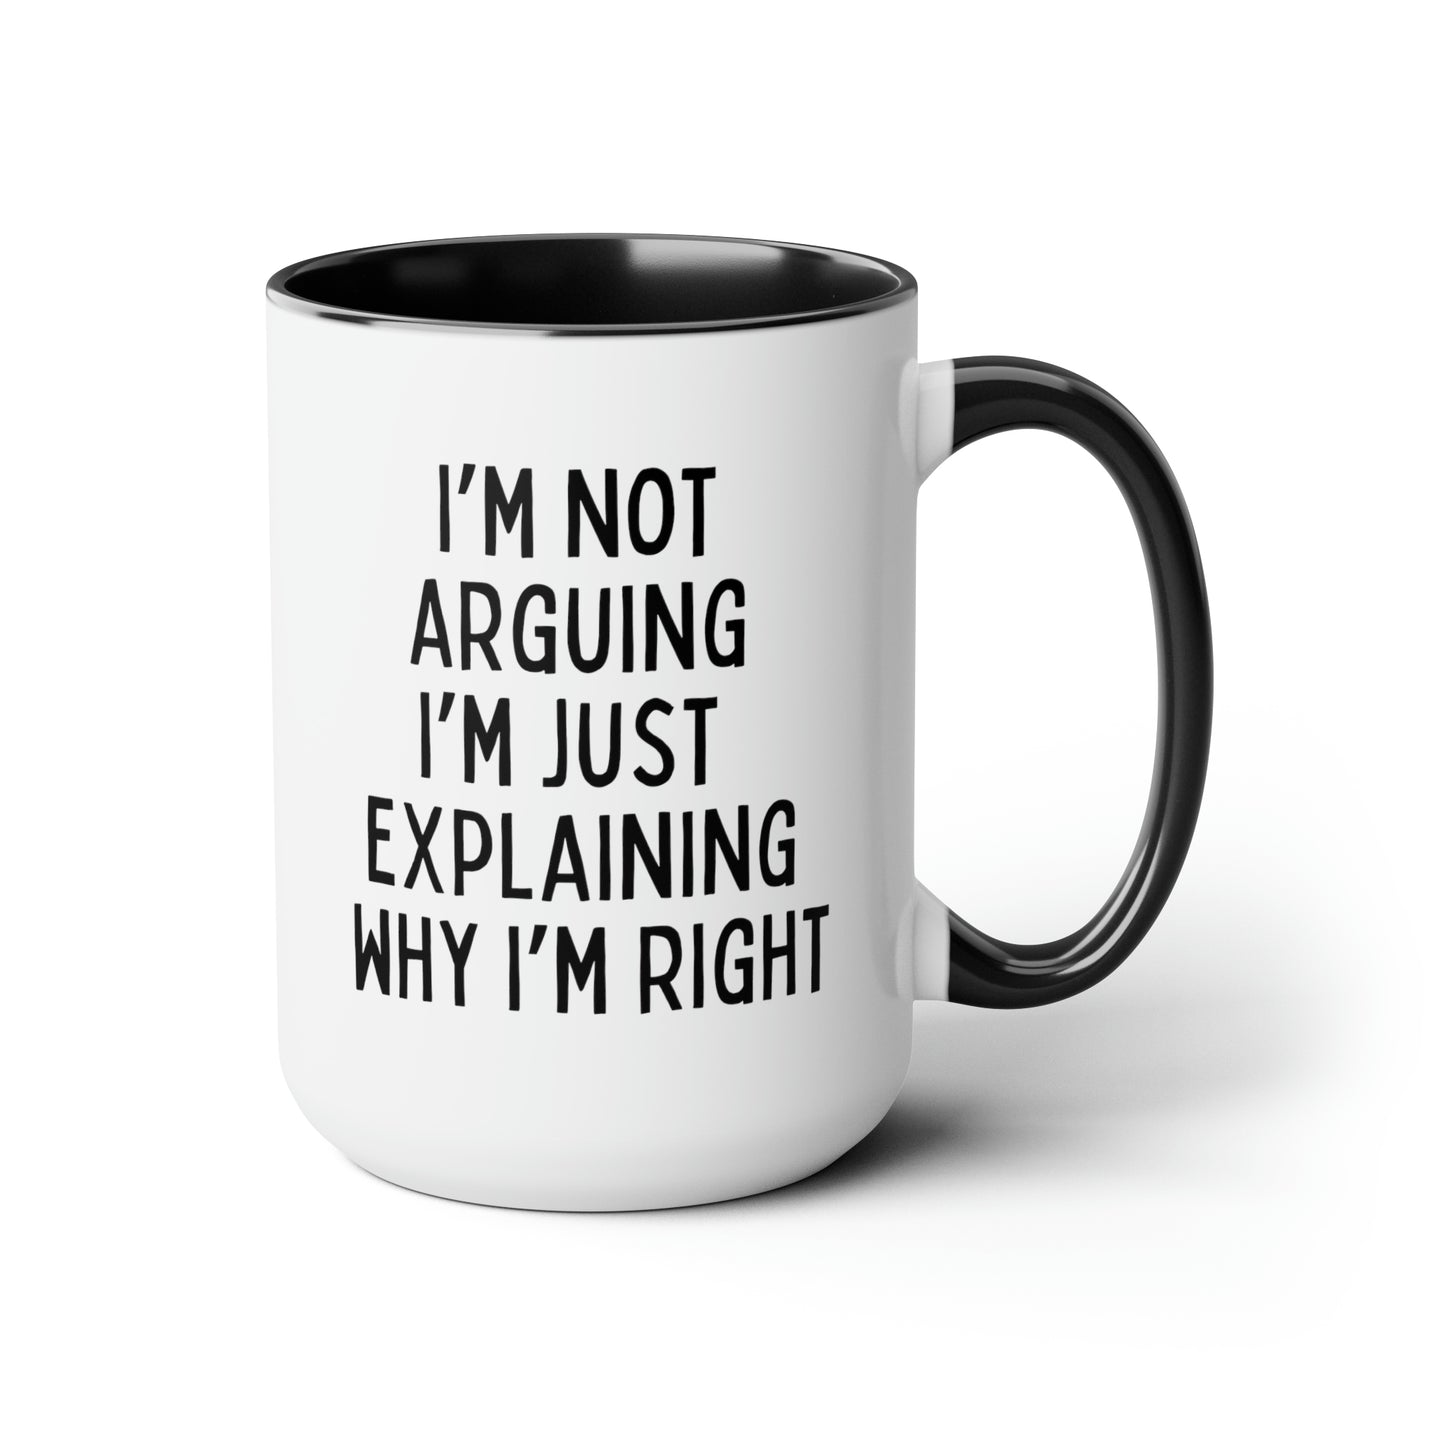 I'm Not Arguing I'm Just Explaining Why I'm Right 15oz white with black accent funny large coffee mug gift for birthday christmas sarcastic sassy snarky tea cup waveywares wavey wares wavywares wavy wares